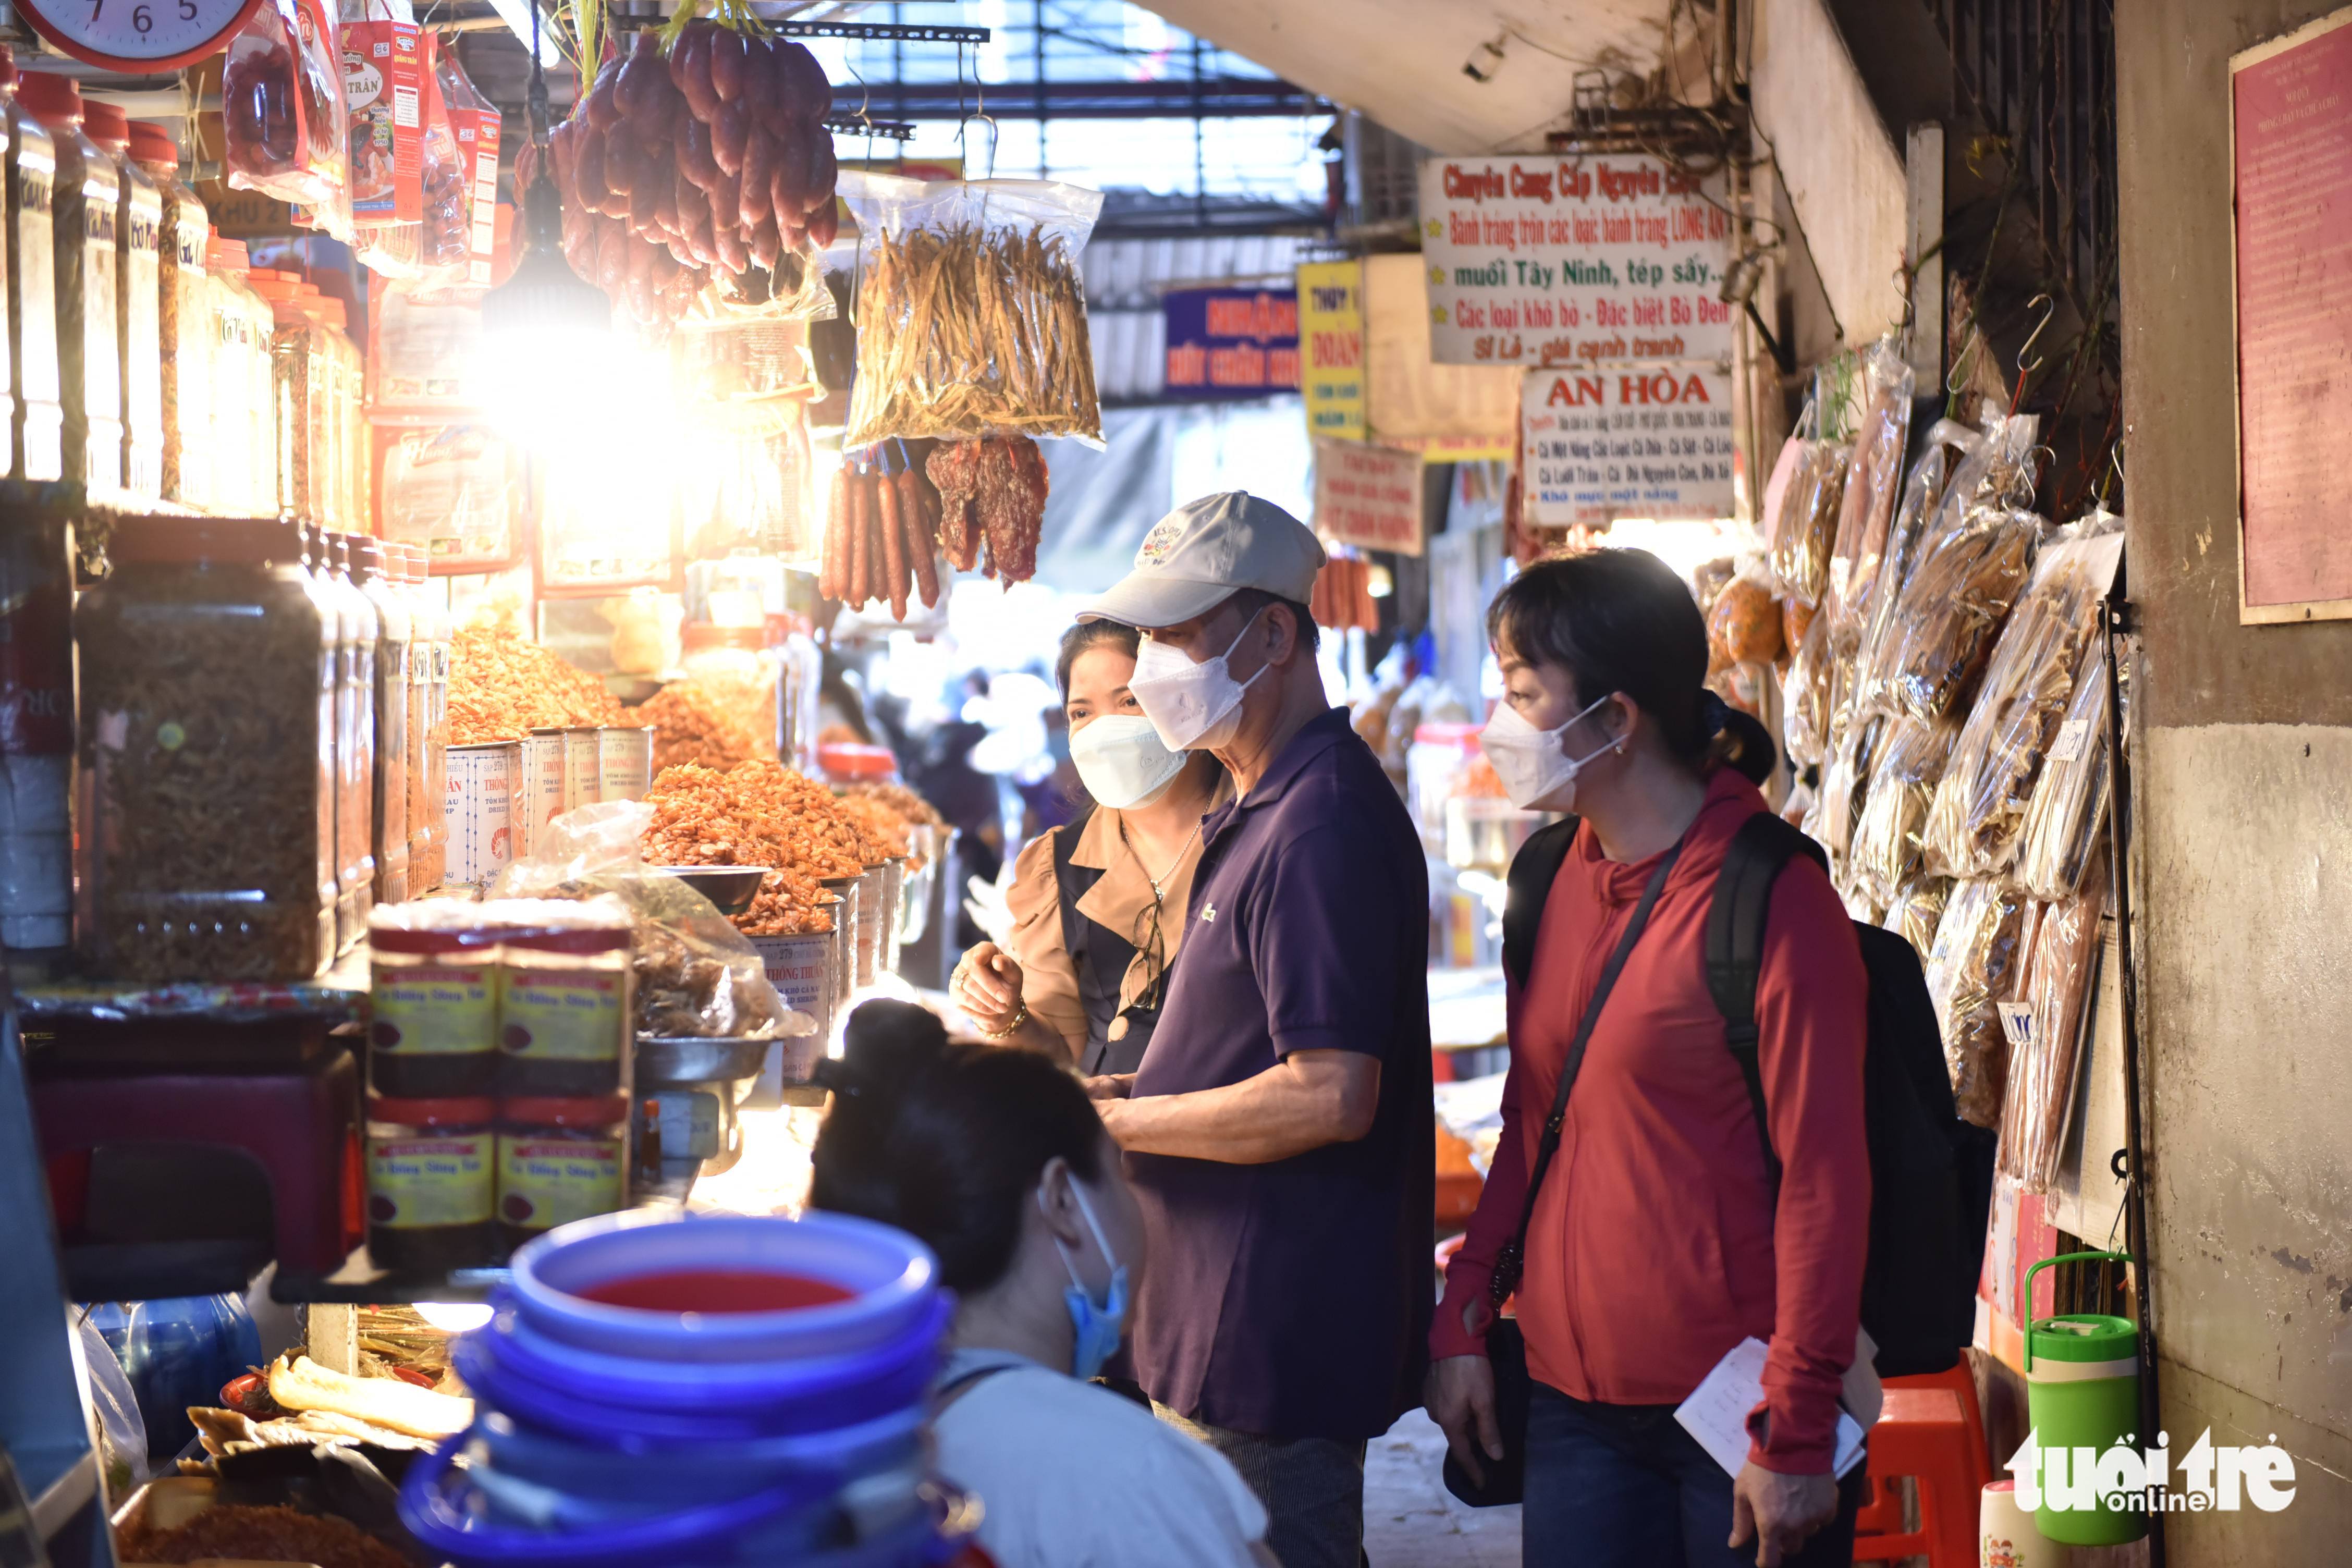 Customers browse for products at Ba Chieu Market in Binh Thanh District, Ho Chi Minh City, May 7, 2022. Photo: Ngoc Phuong / Tuoi Tre